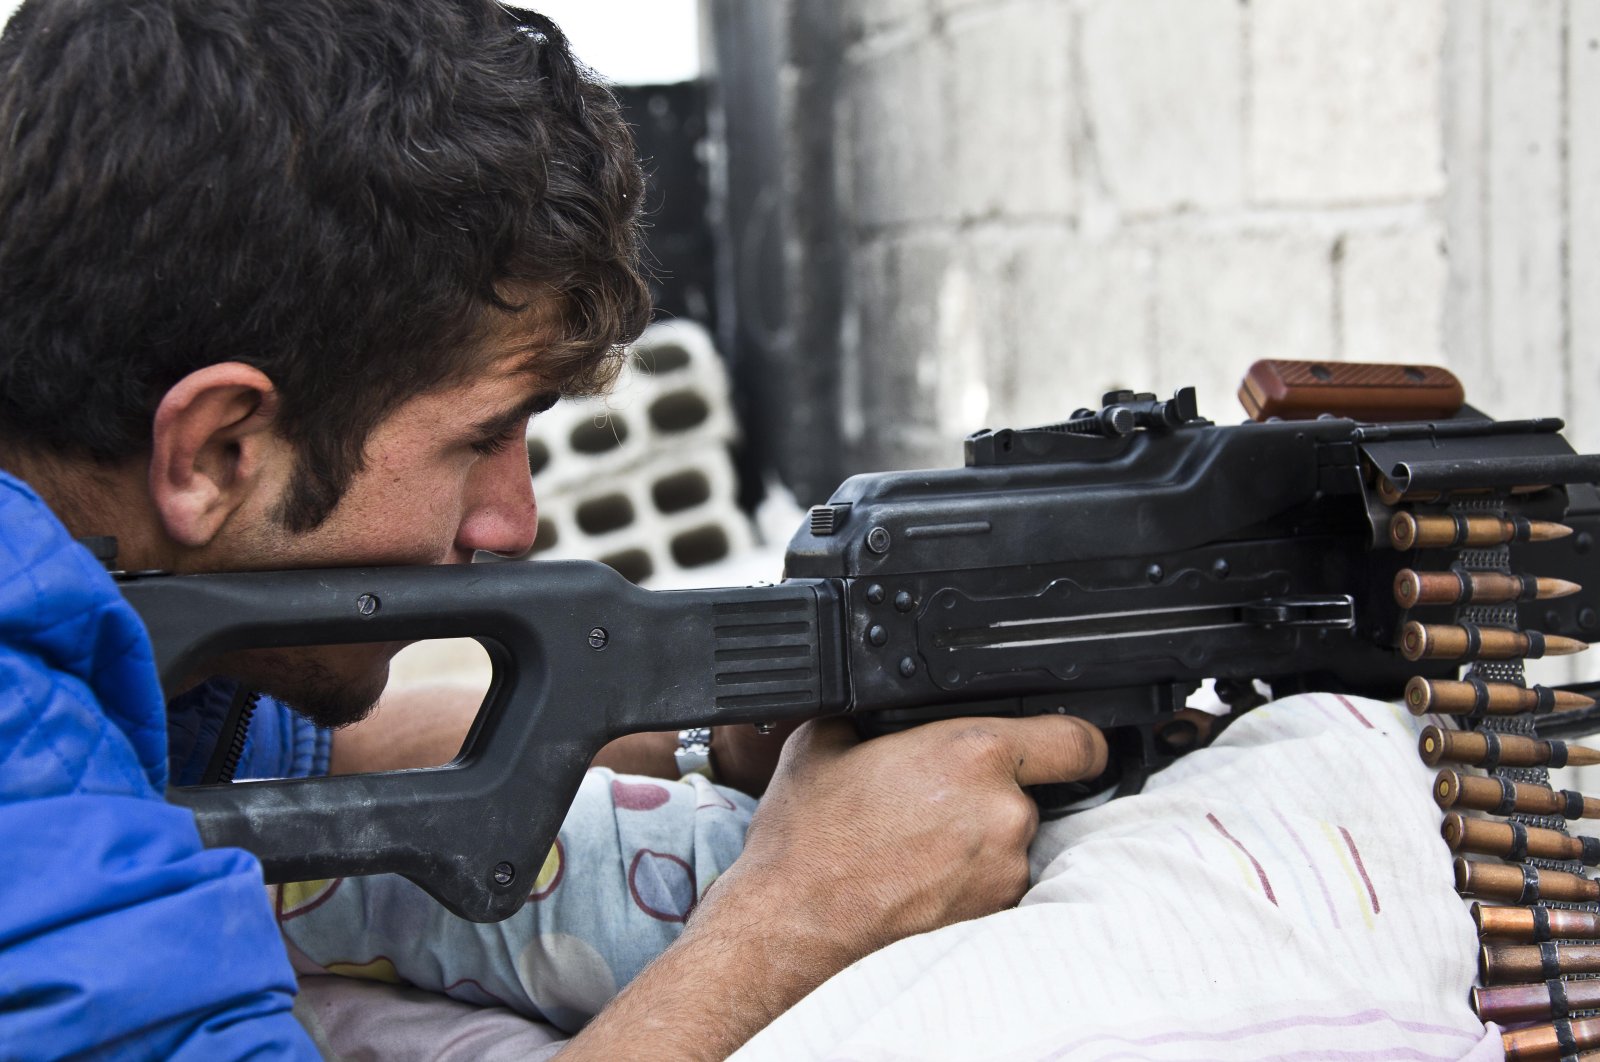 A young member of the YPG who recently volunteered for the terrorist group holds a position with his weapon in Kobani, Syria, Nov. 19, 2014. (AP Photo)